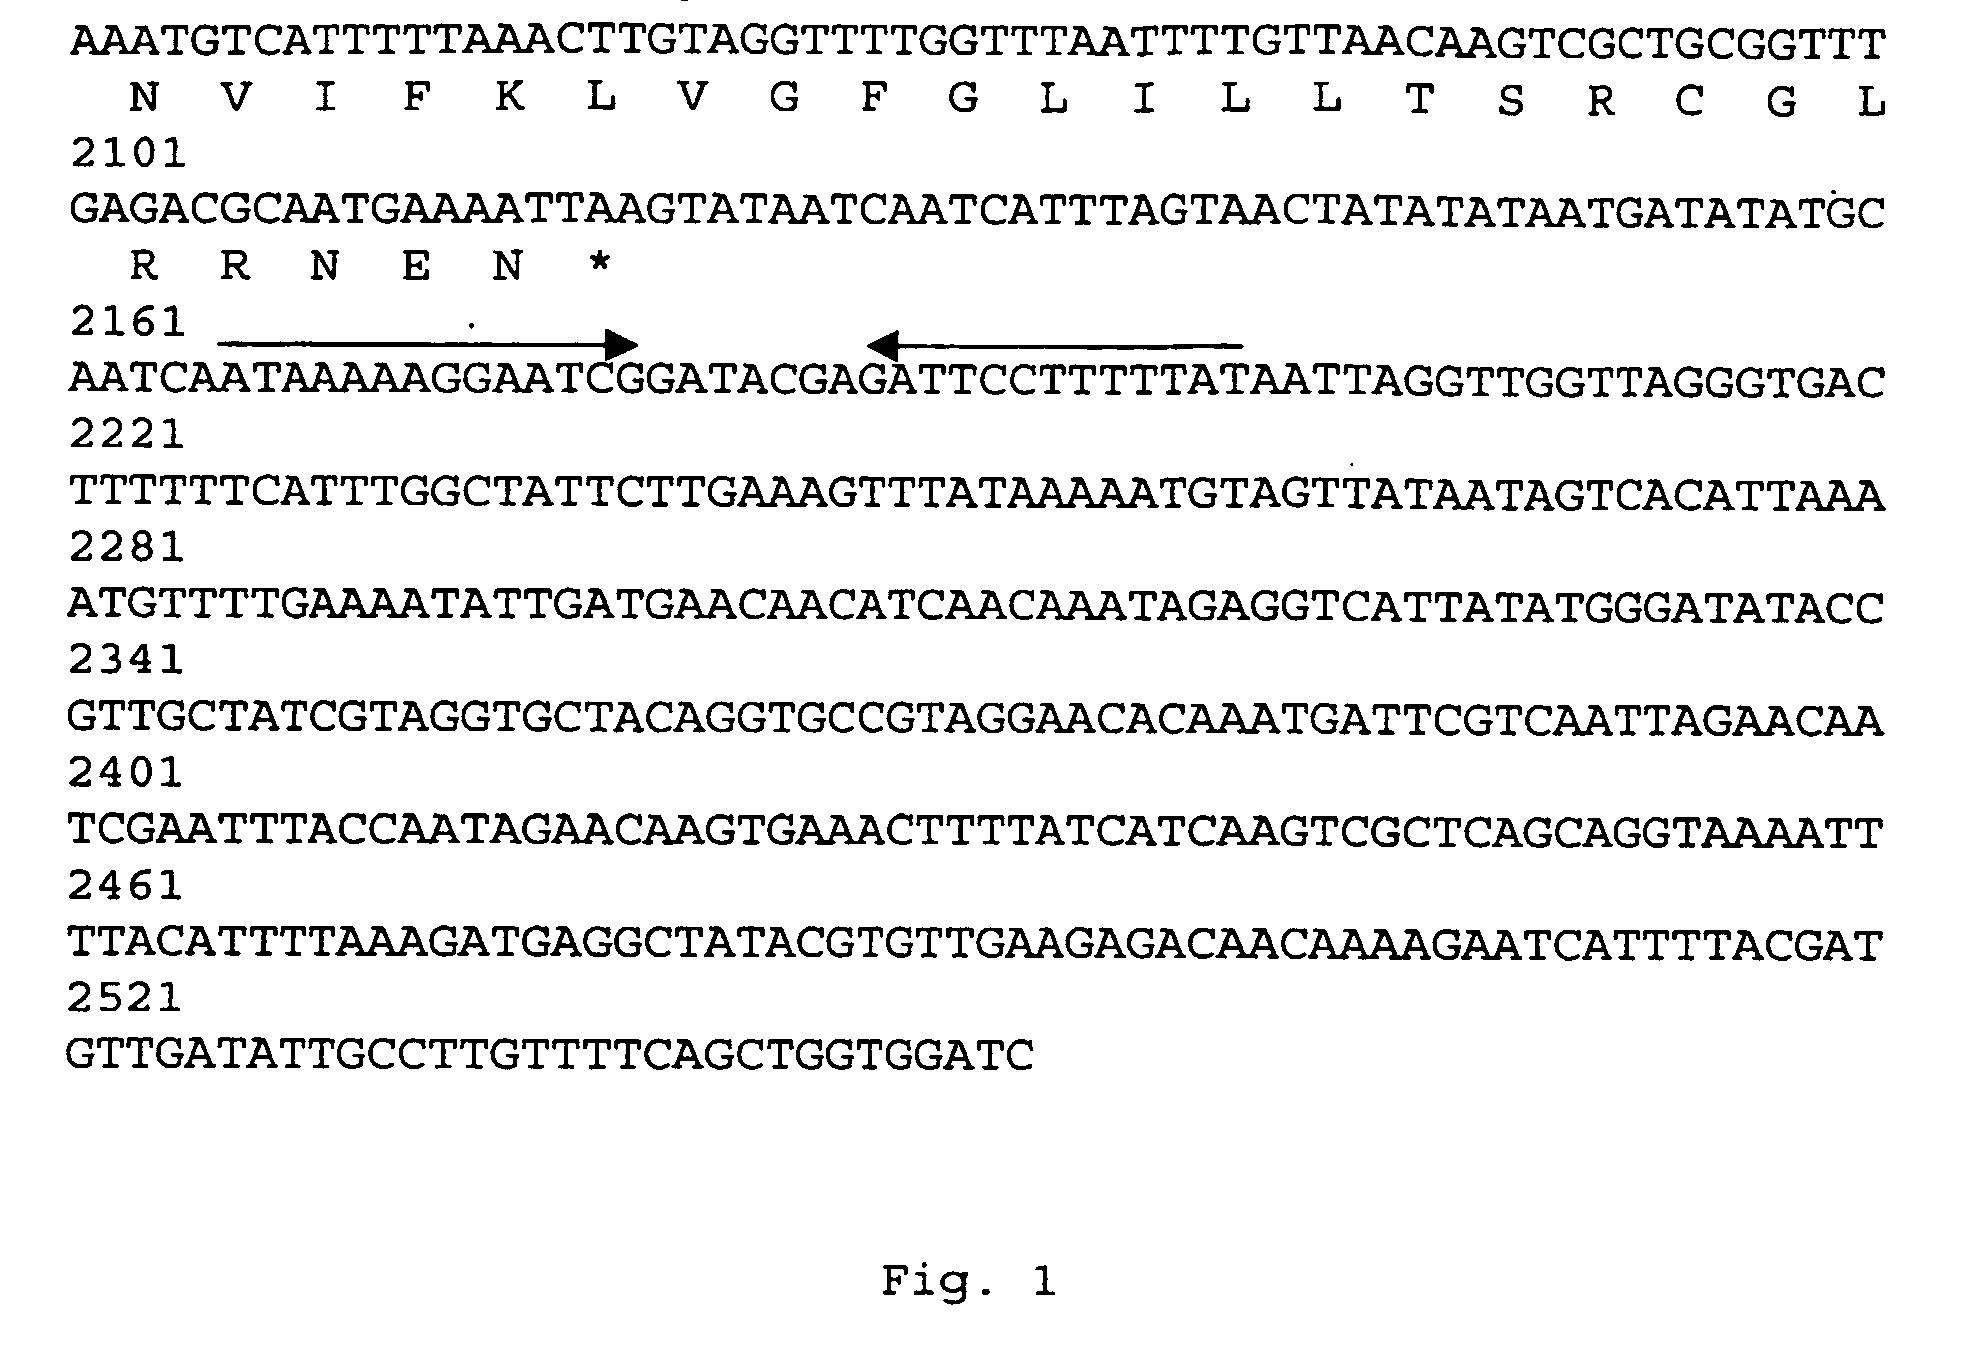 Nucleic acids coding for adhesion factor of group b streptococcus, adhesion factors of group b streptococcus and further uses thereof